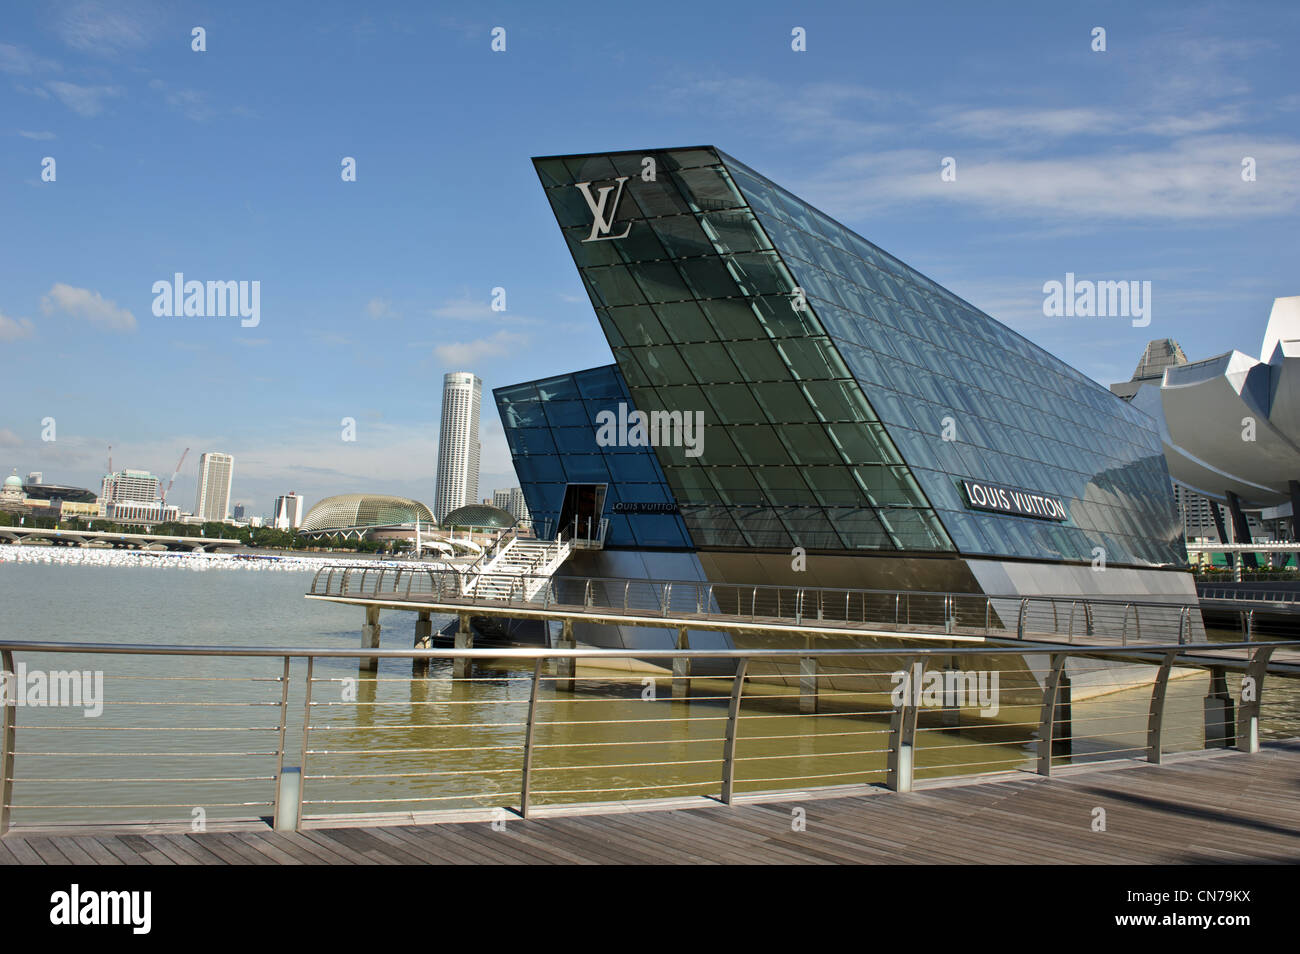 Louis vuitton singapore hi-res stock photography and images - Alamy